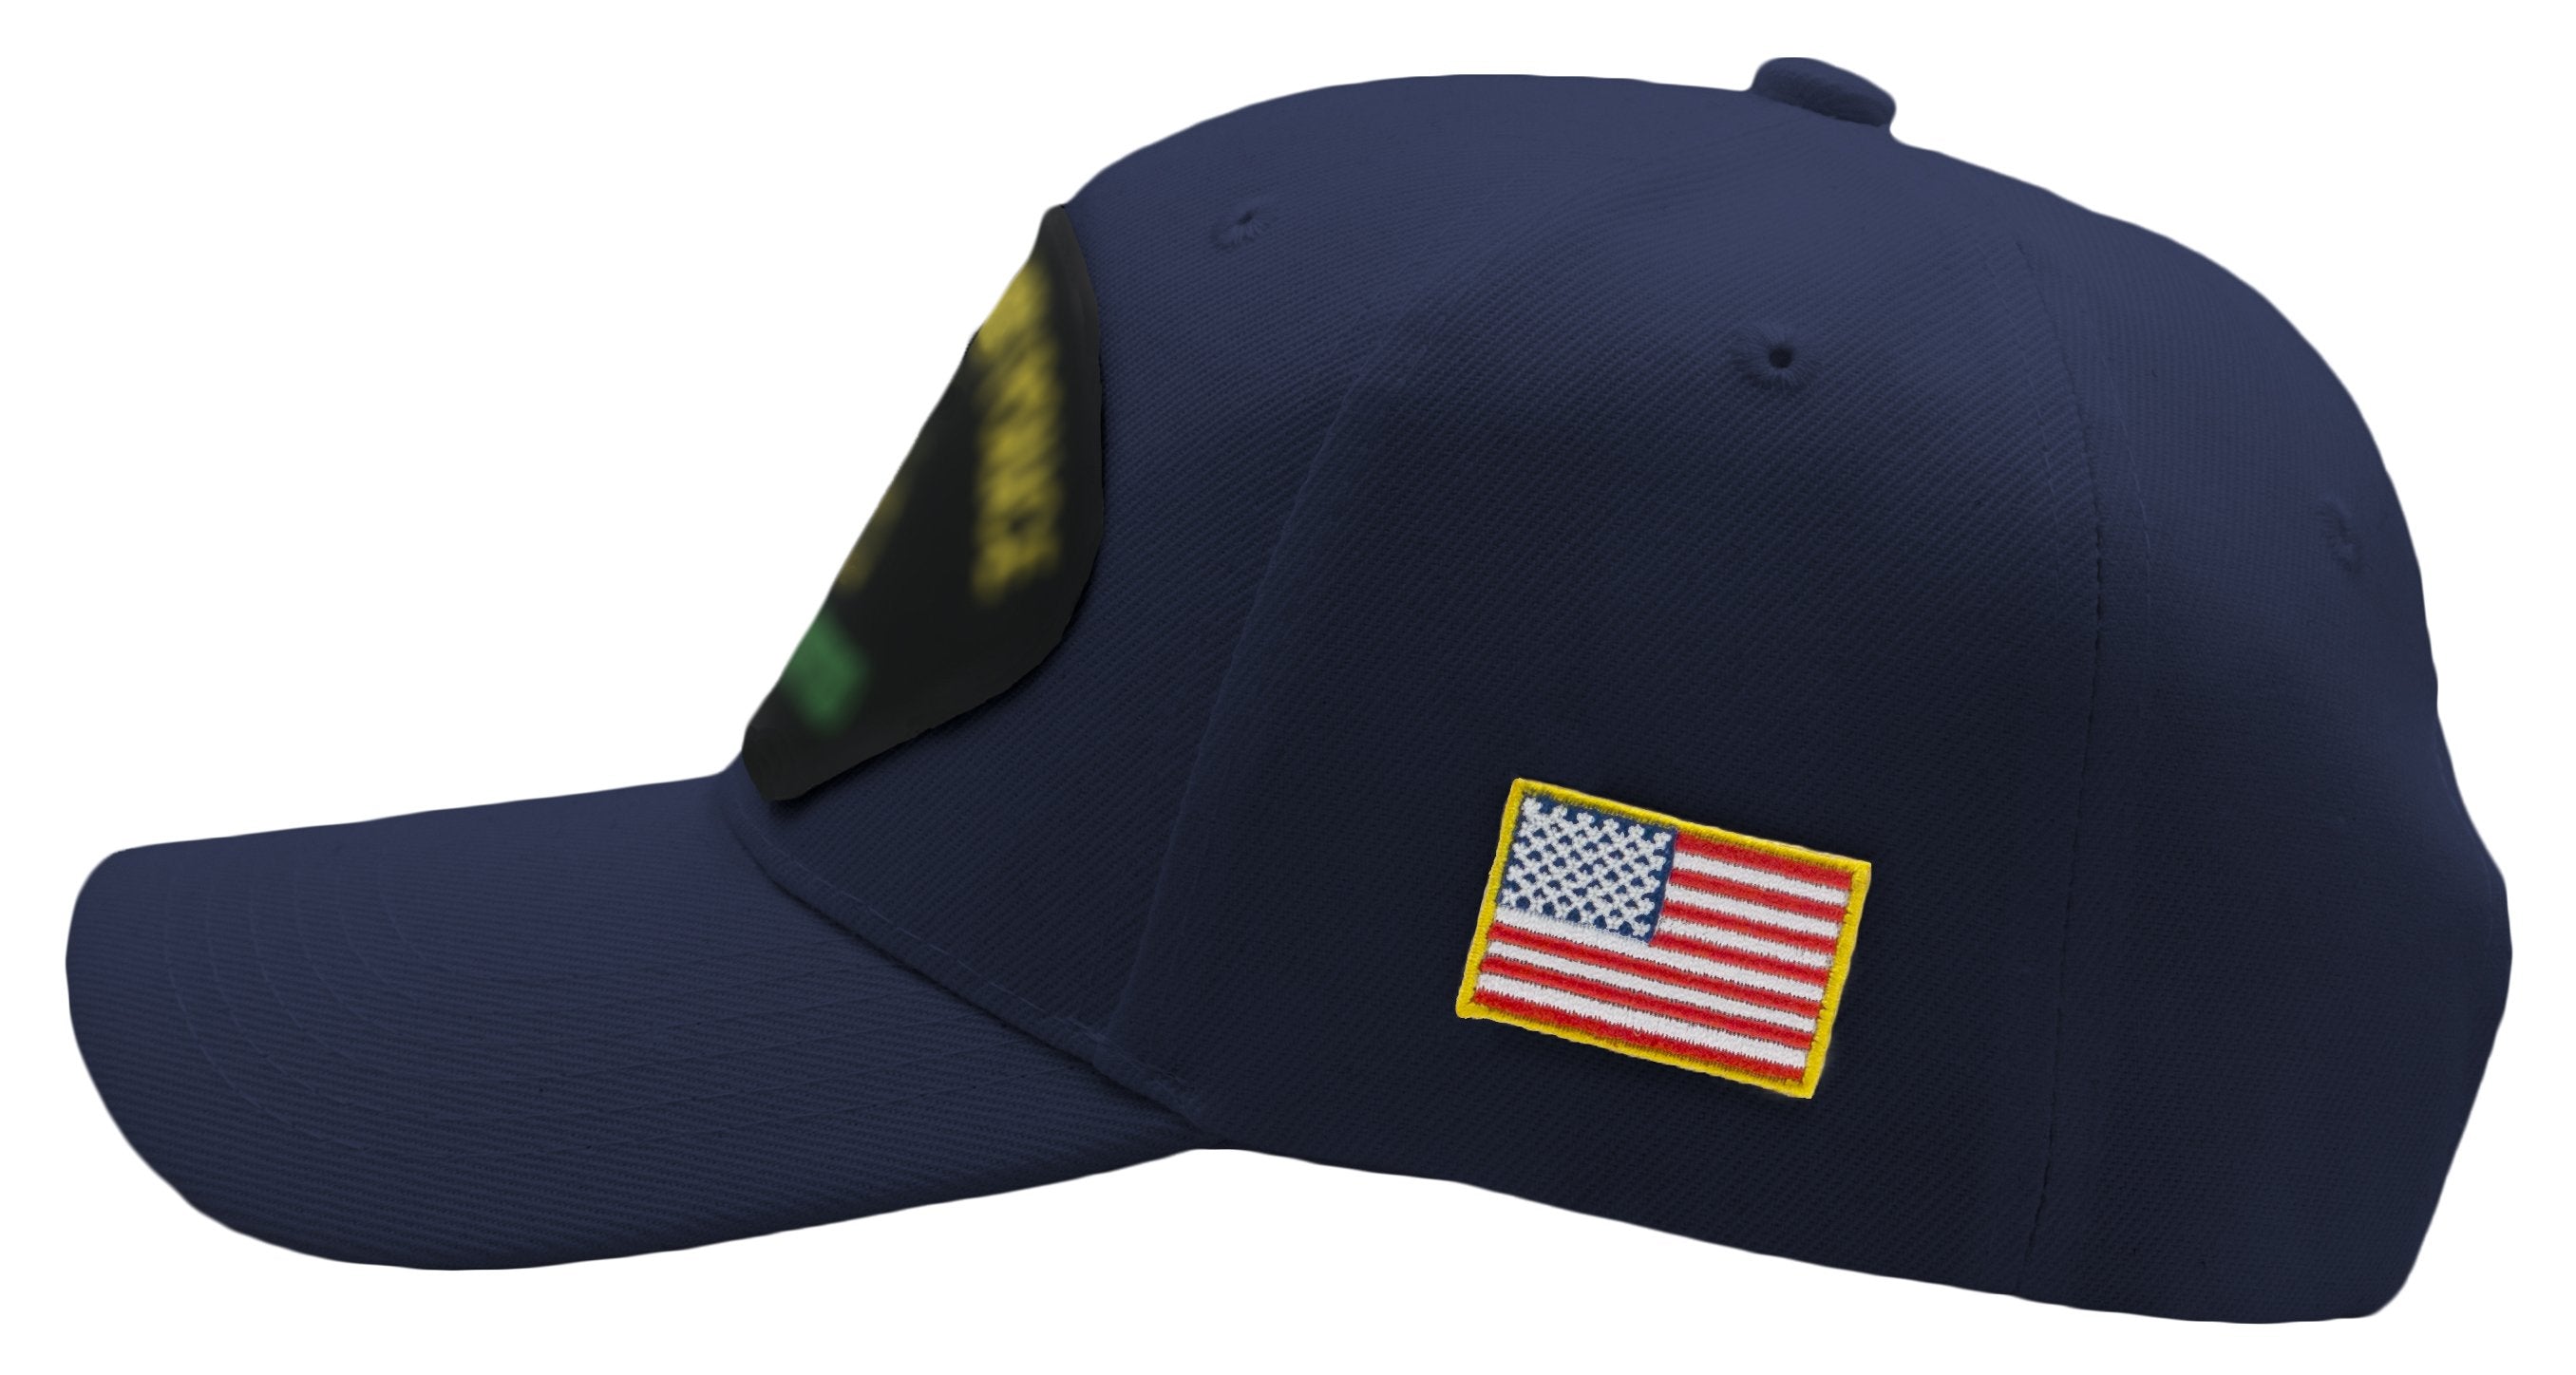 F-16 Fighting Falcon - Desert Storm Veteran Hat - Multiple Colors Available